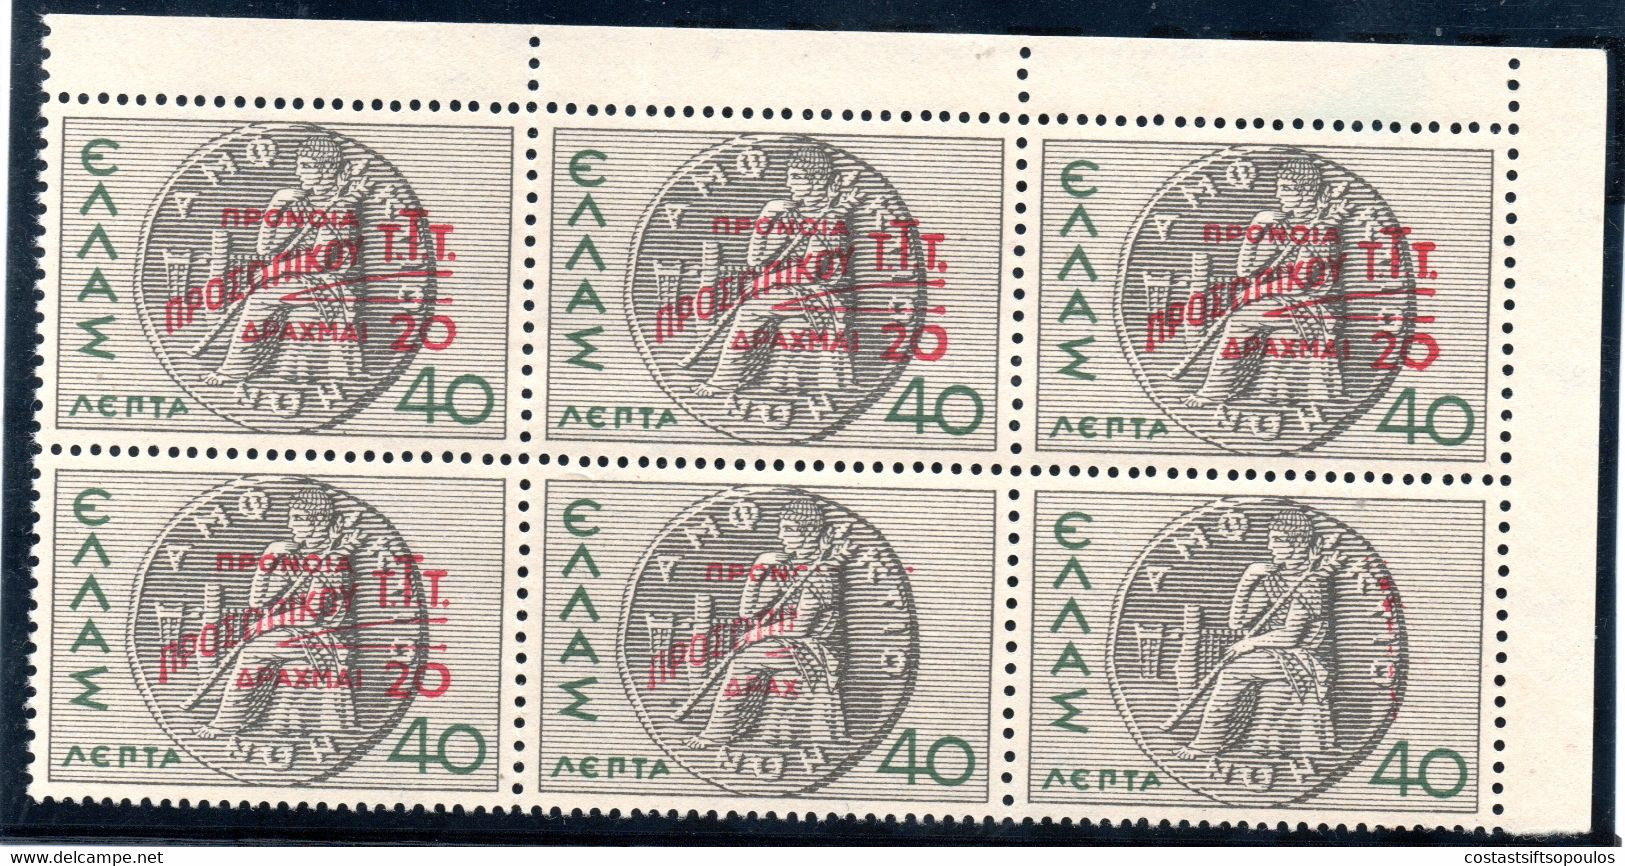 926.GREECE.1946 CHARITY COIN OF AMPHICTYONY HELLAS C96f MNH BLOCK OF 6 ONE WITHOUT OVERPR.VERY SCARCE - Plaatfouten En Curiosa